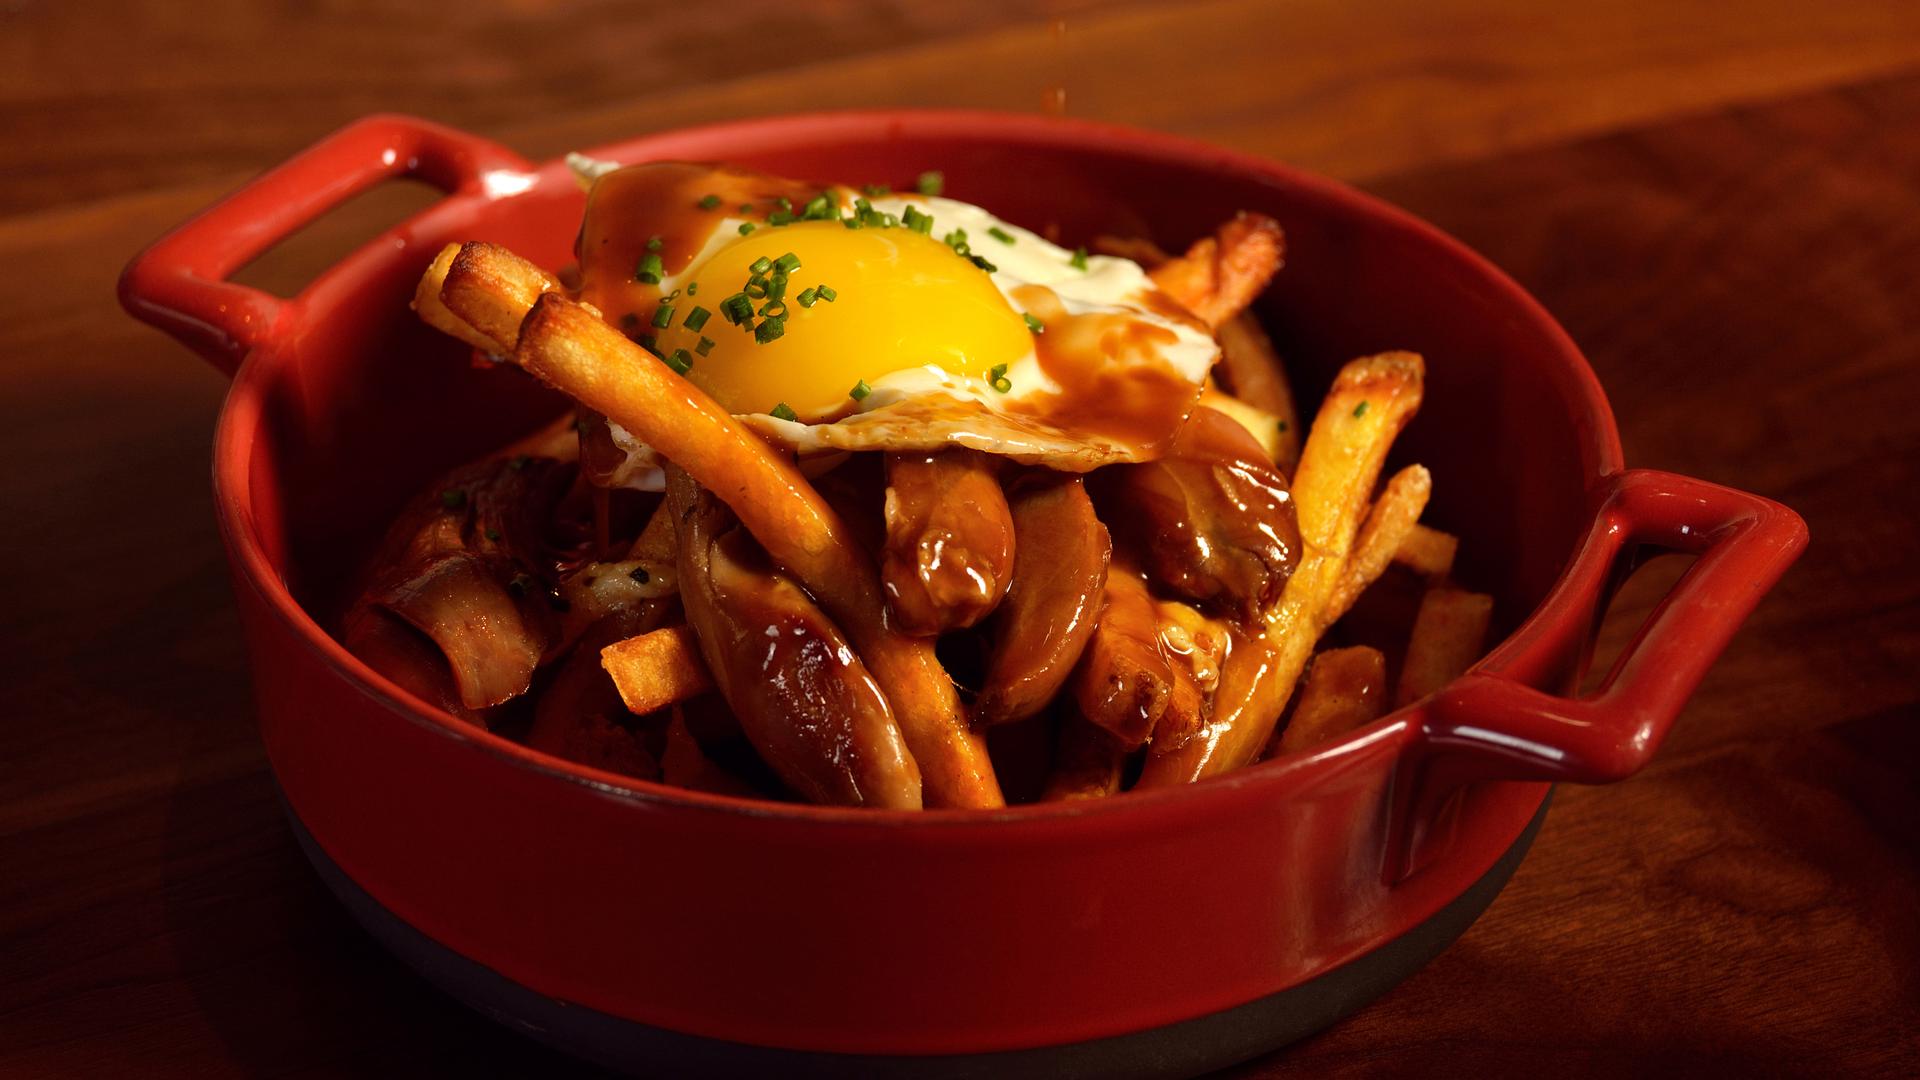 The poutine at the Public House at the Venetian Hotel in Las Vegas: fries topped with duck confit, stout gravy, cheese curd and a fried egg.